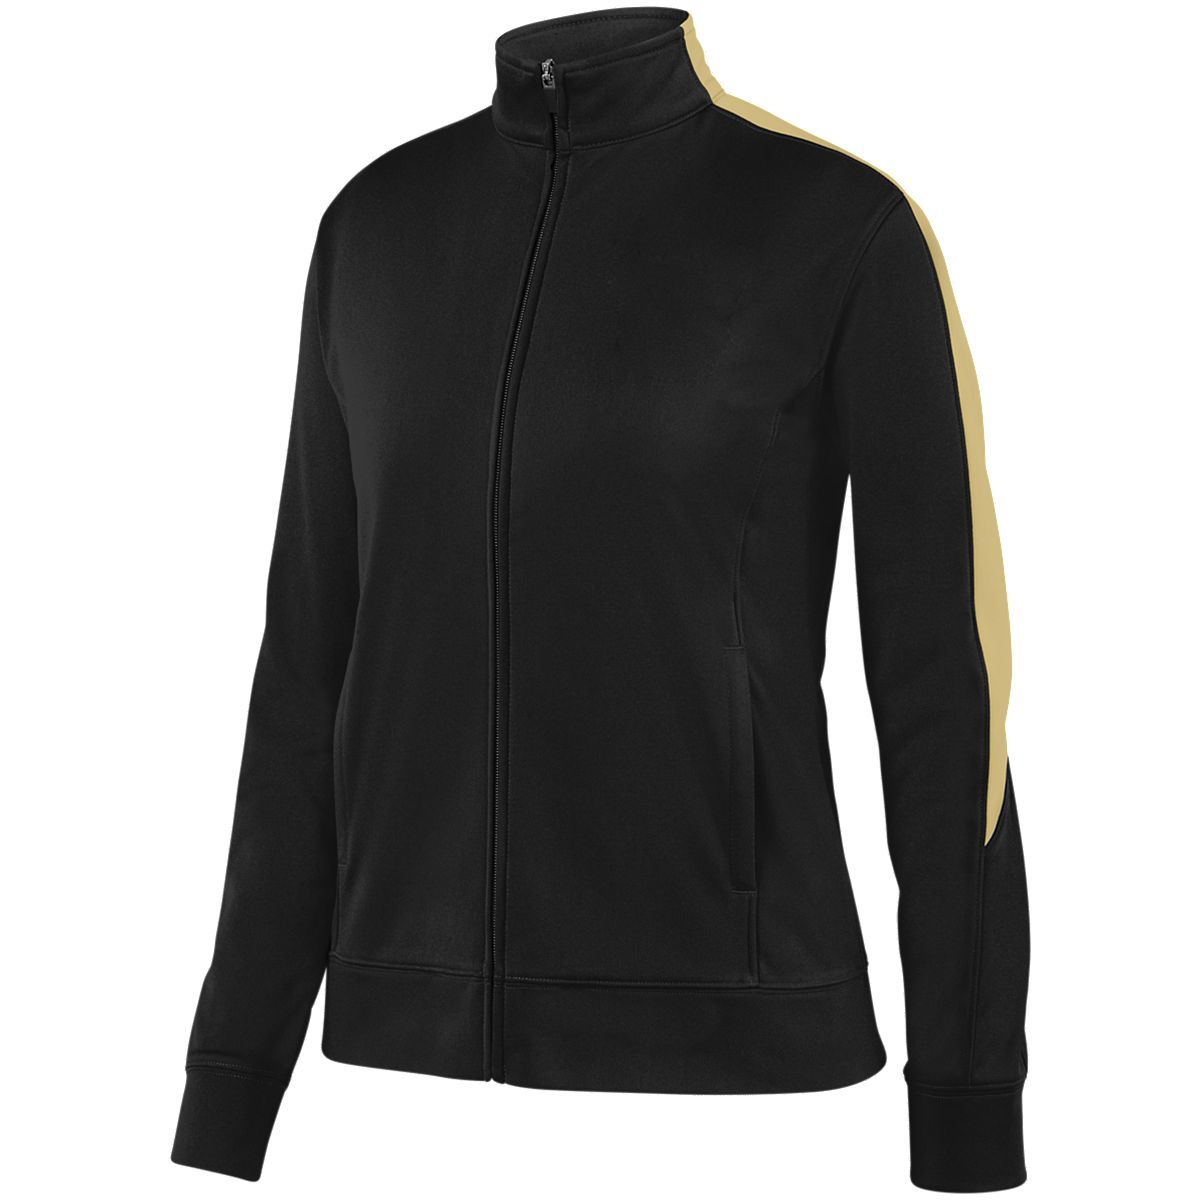 Augusta Sportswear Ladies Medalist Jacket 2.0 in Black/Vegas Gold  -Part of the Ladies, Ladies-Jacket, Augusta-Products, Outerwear product lines at KanaleyCreations.com